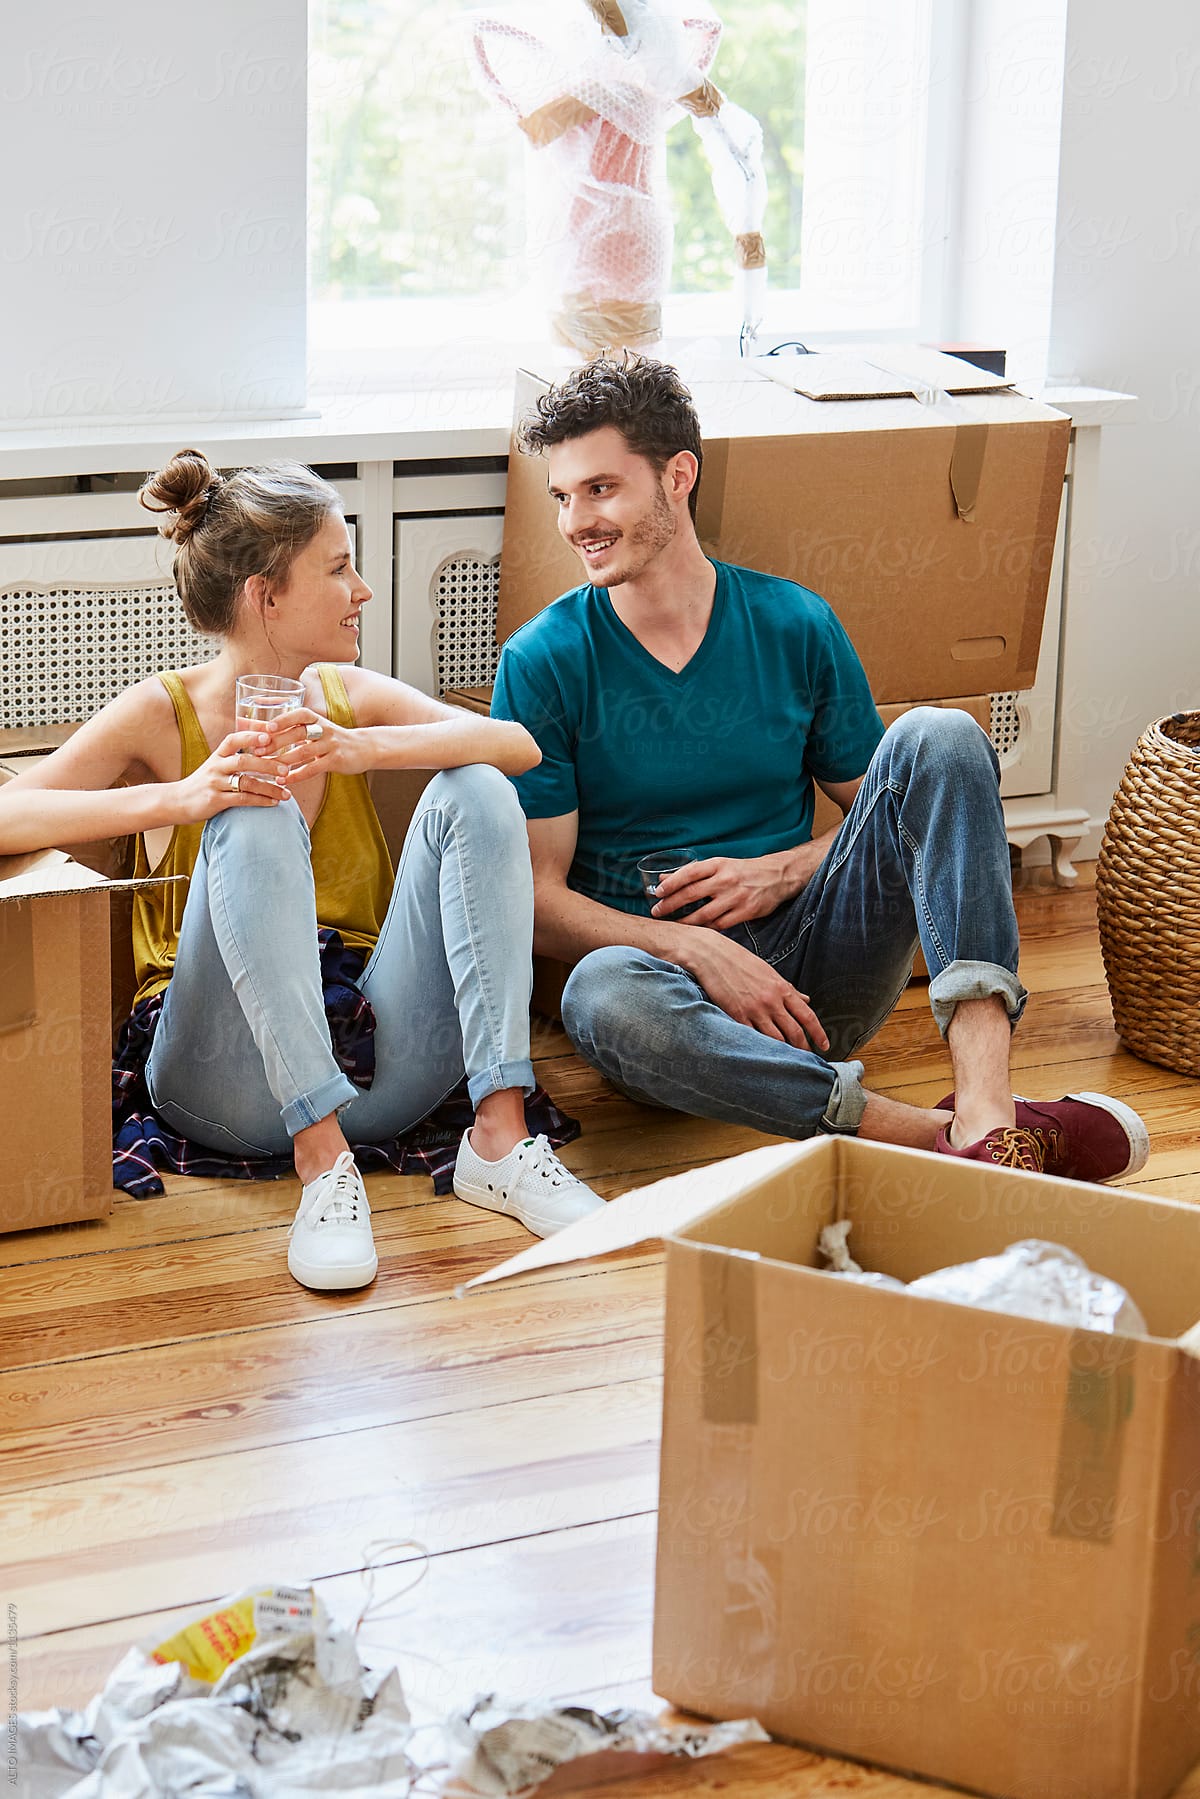 Couple Talking While Taking Break From Unpacking In House